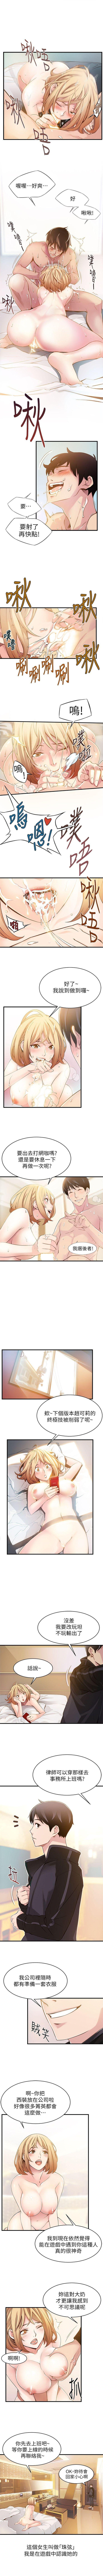 Bokep 弱點 1-91 官方中文（連載中） Gloryholes - Page 3